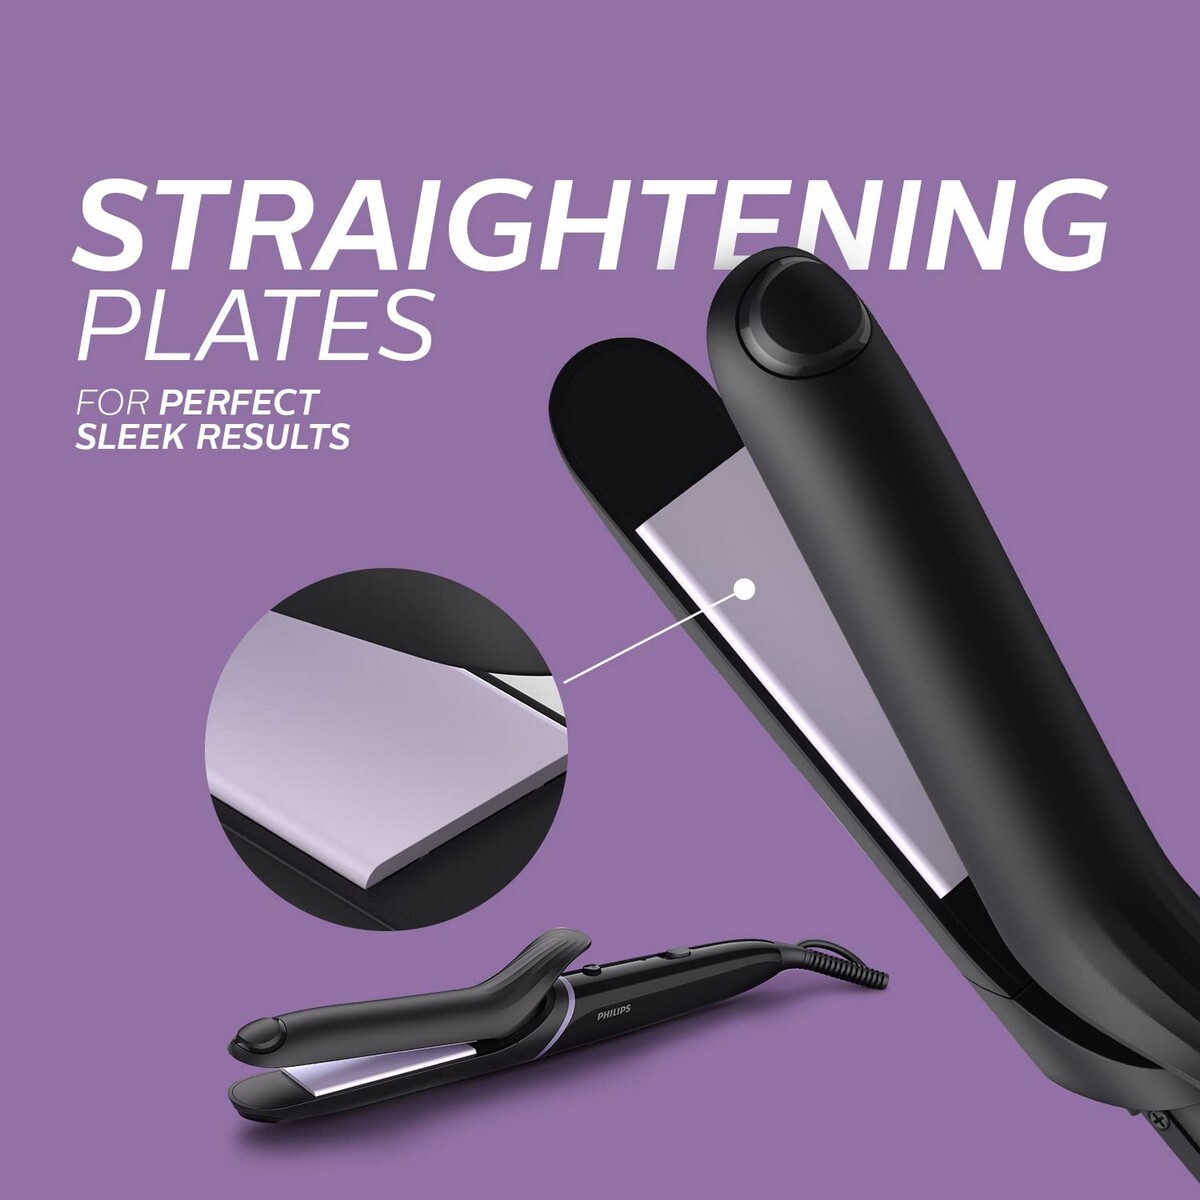 PHILIPS BHH816 Crimp, Straighten or Curl with the single tool, quickly and without fear of heat damage, Black Multi Styling Kit